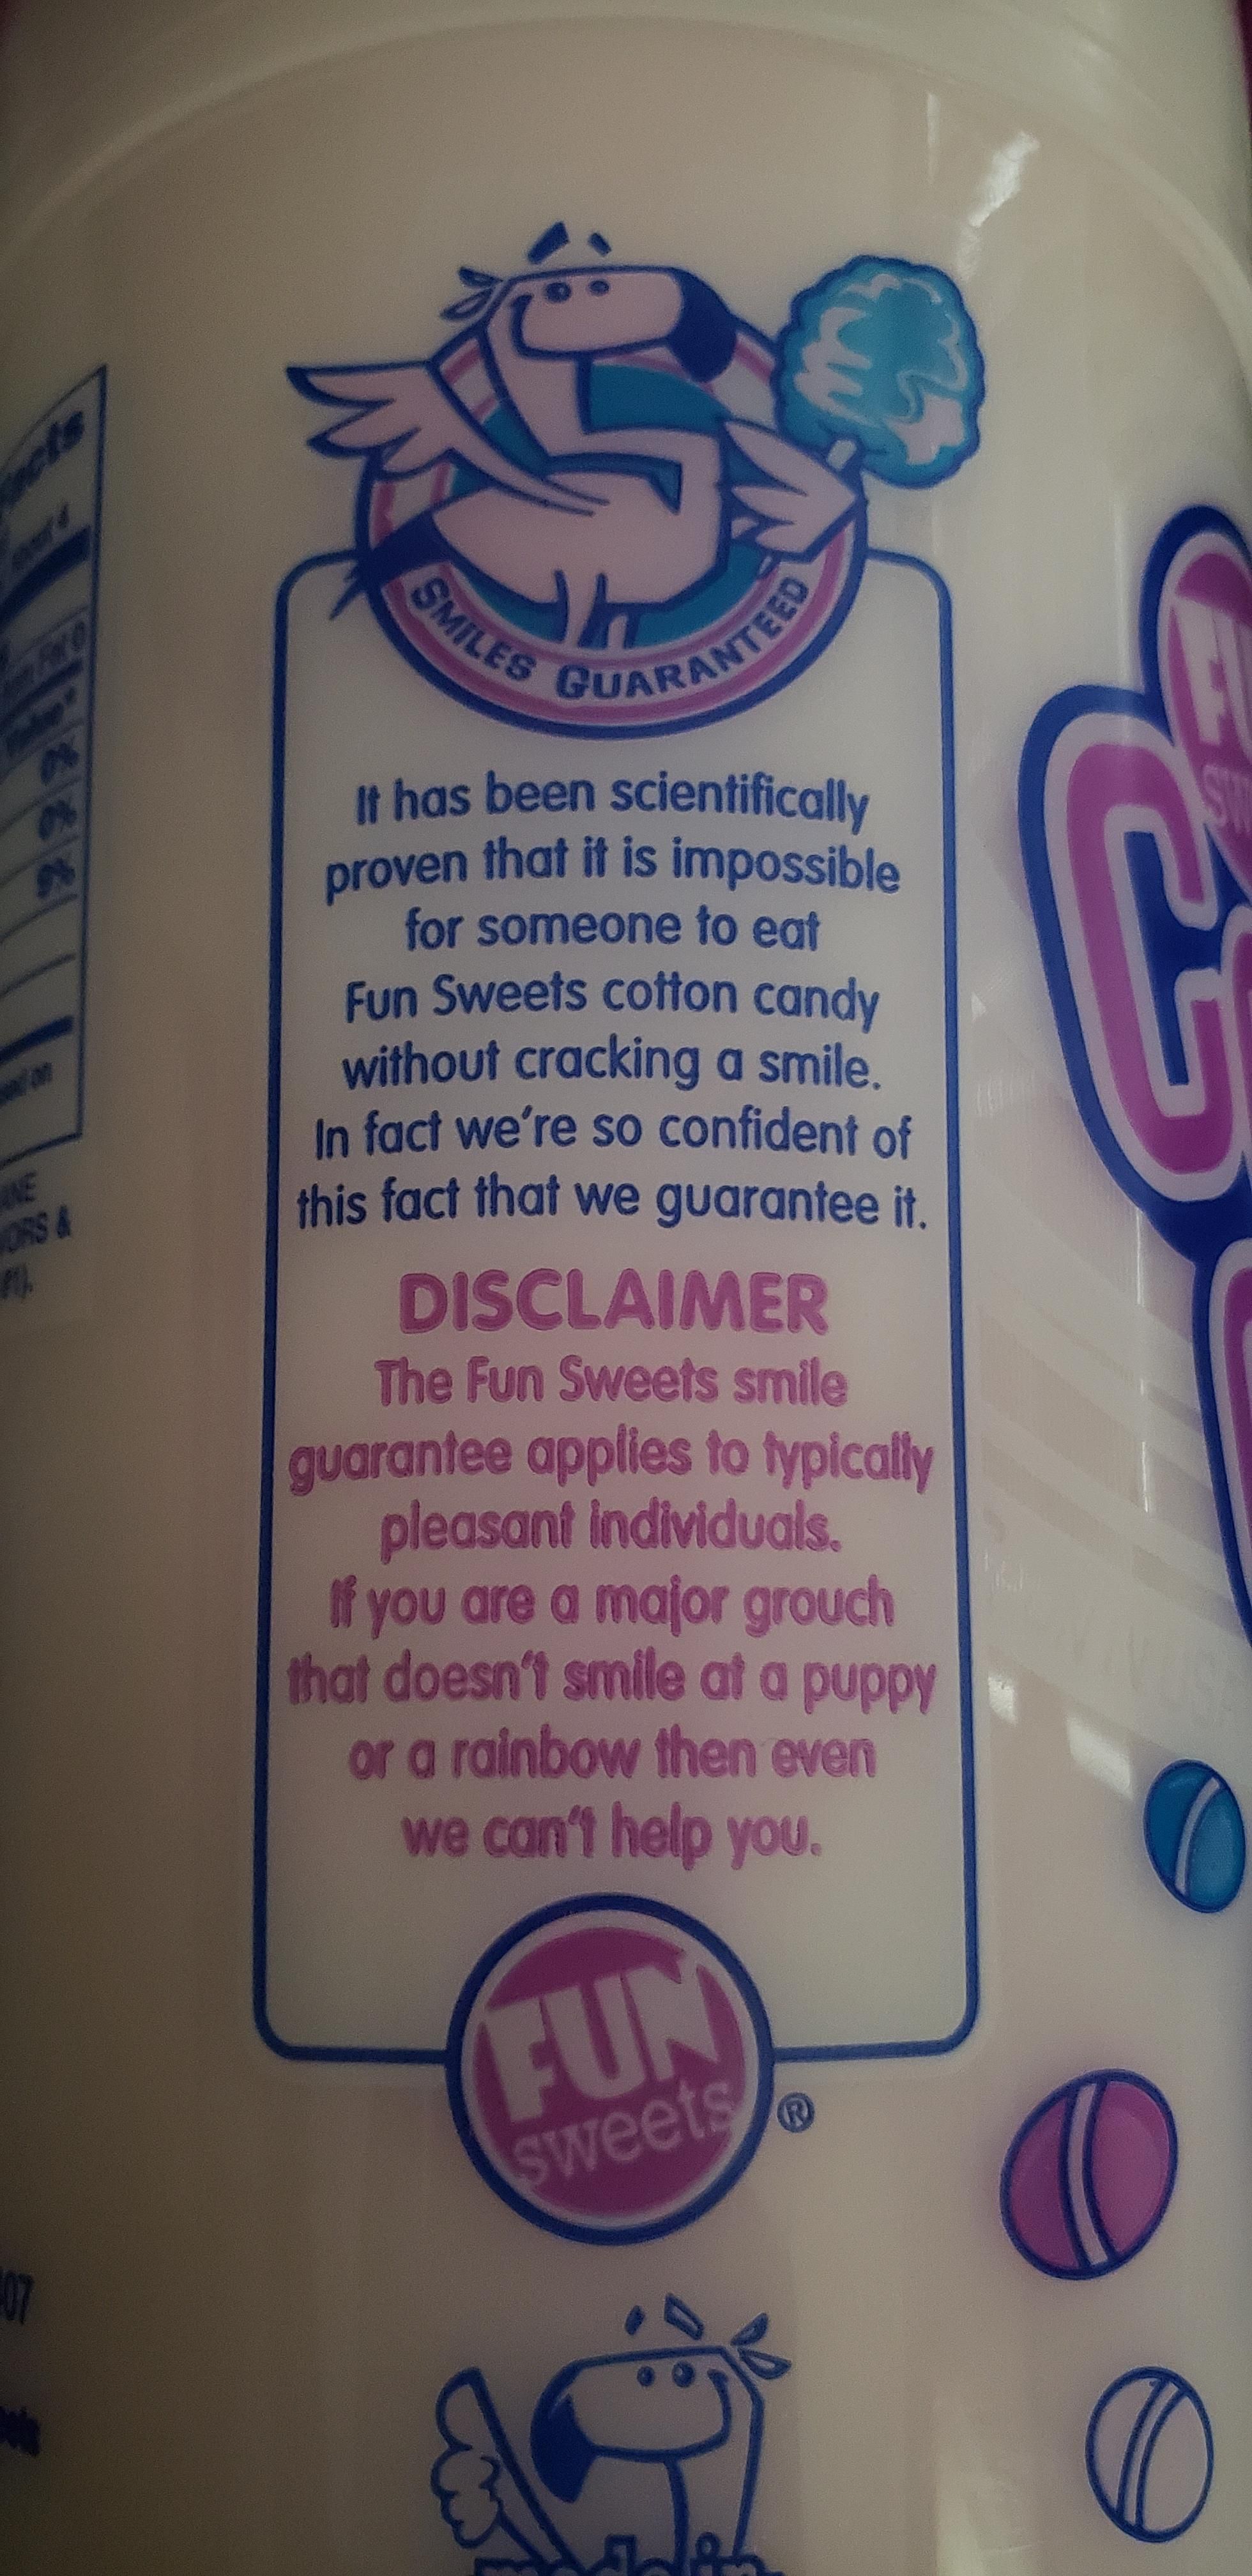 Disclaimer on Cotton Candy